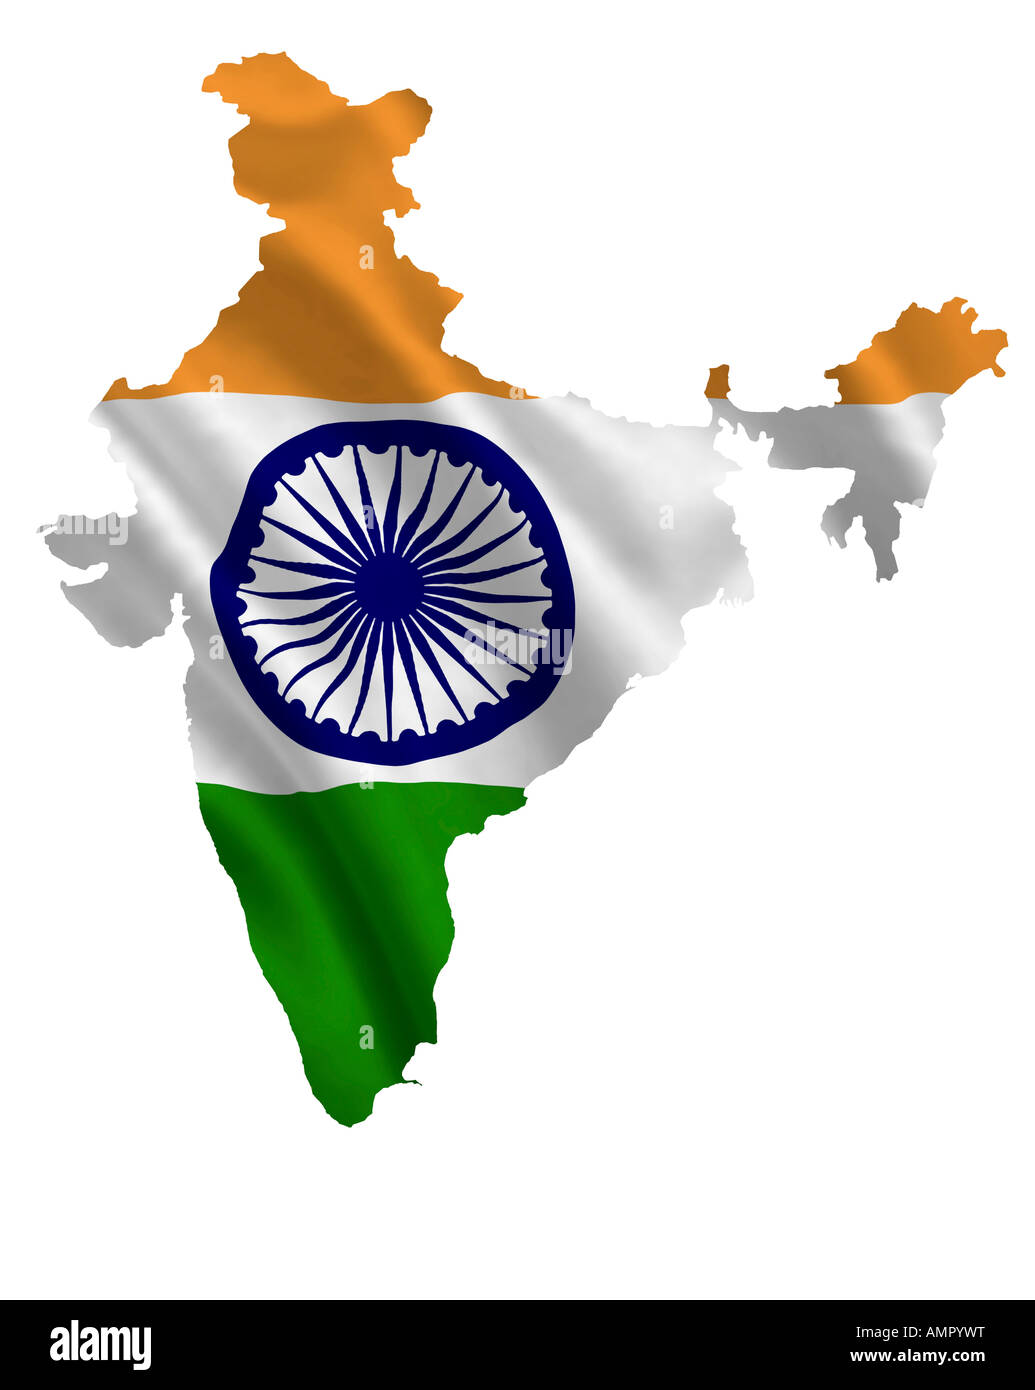 India Map And Flag Design Stock Photo 15319331 Alamy